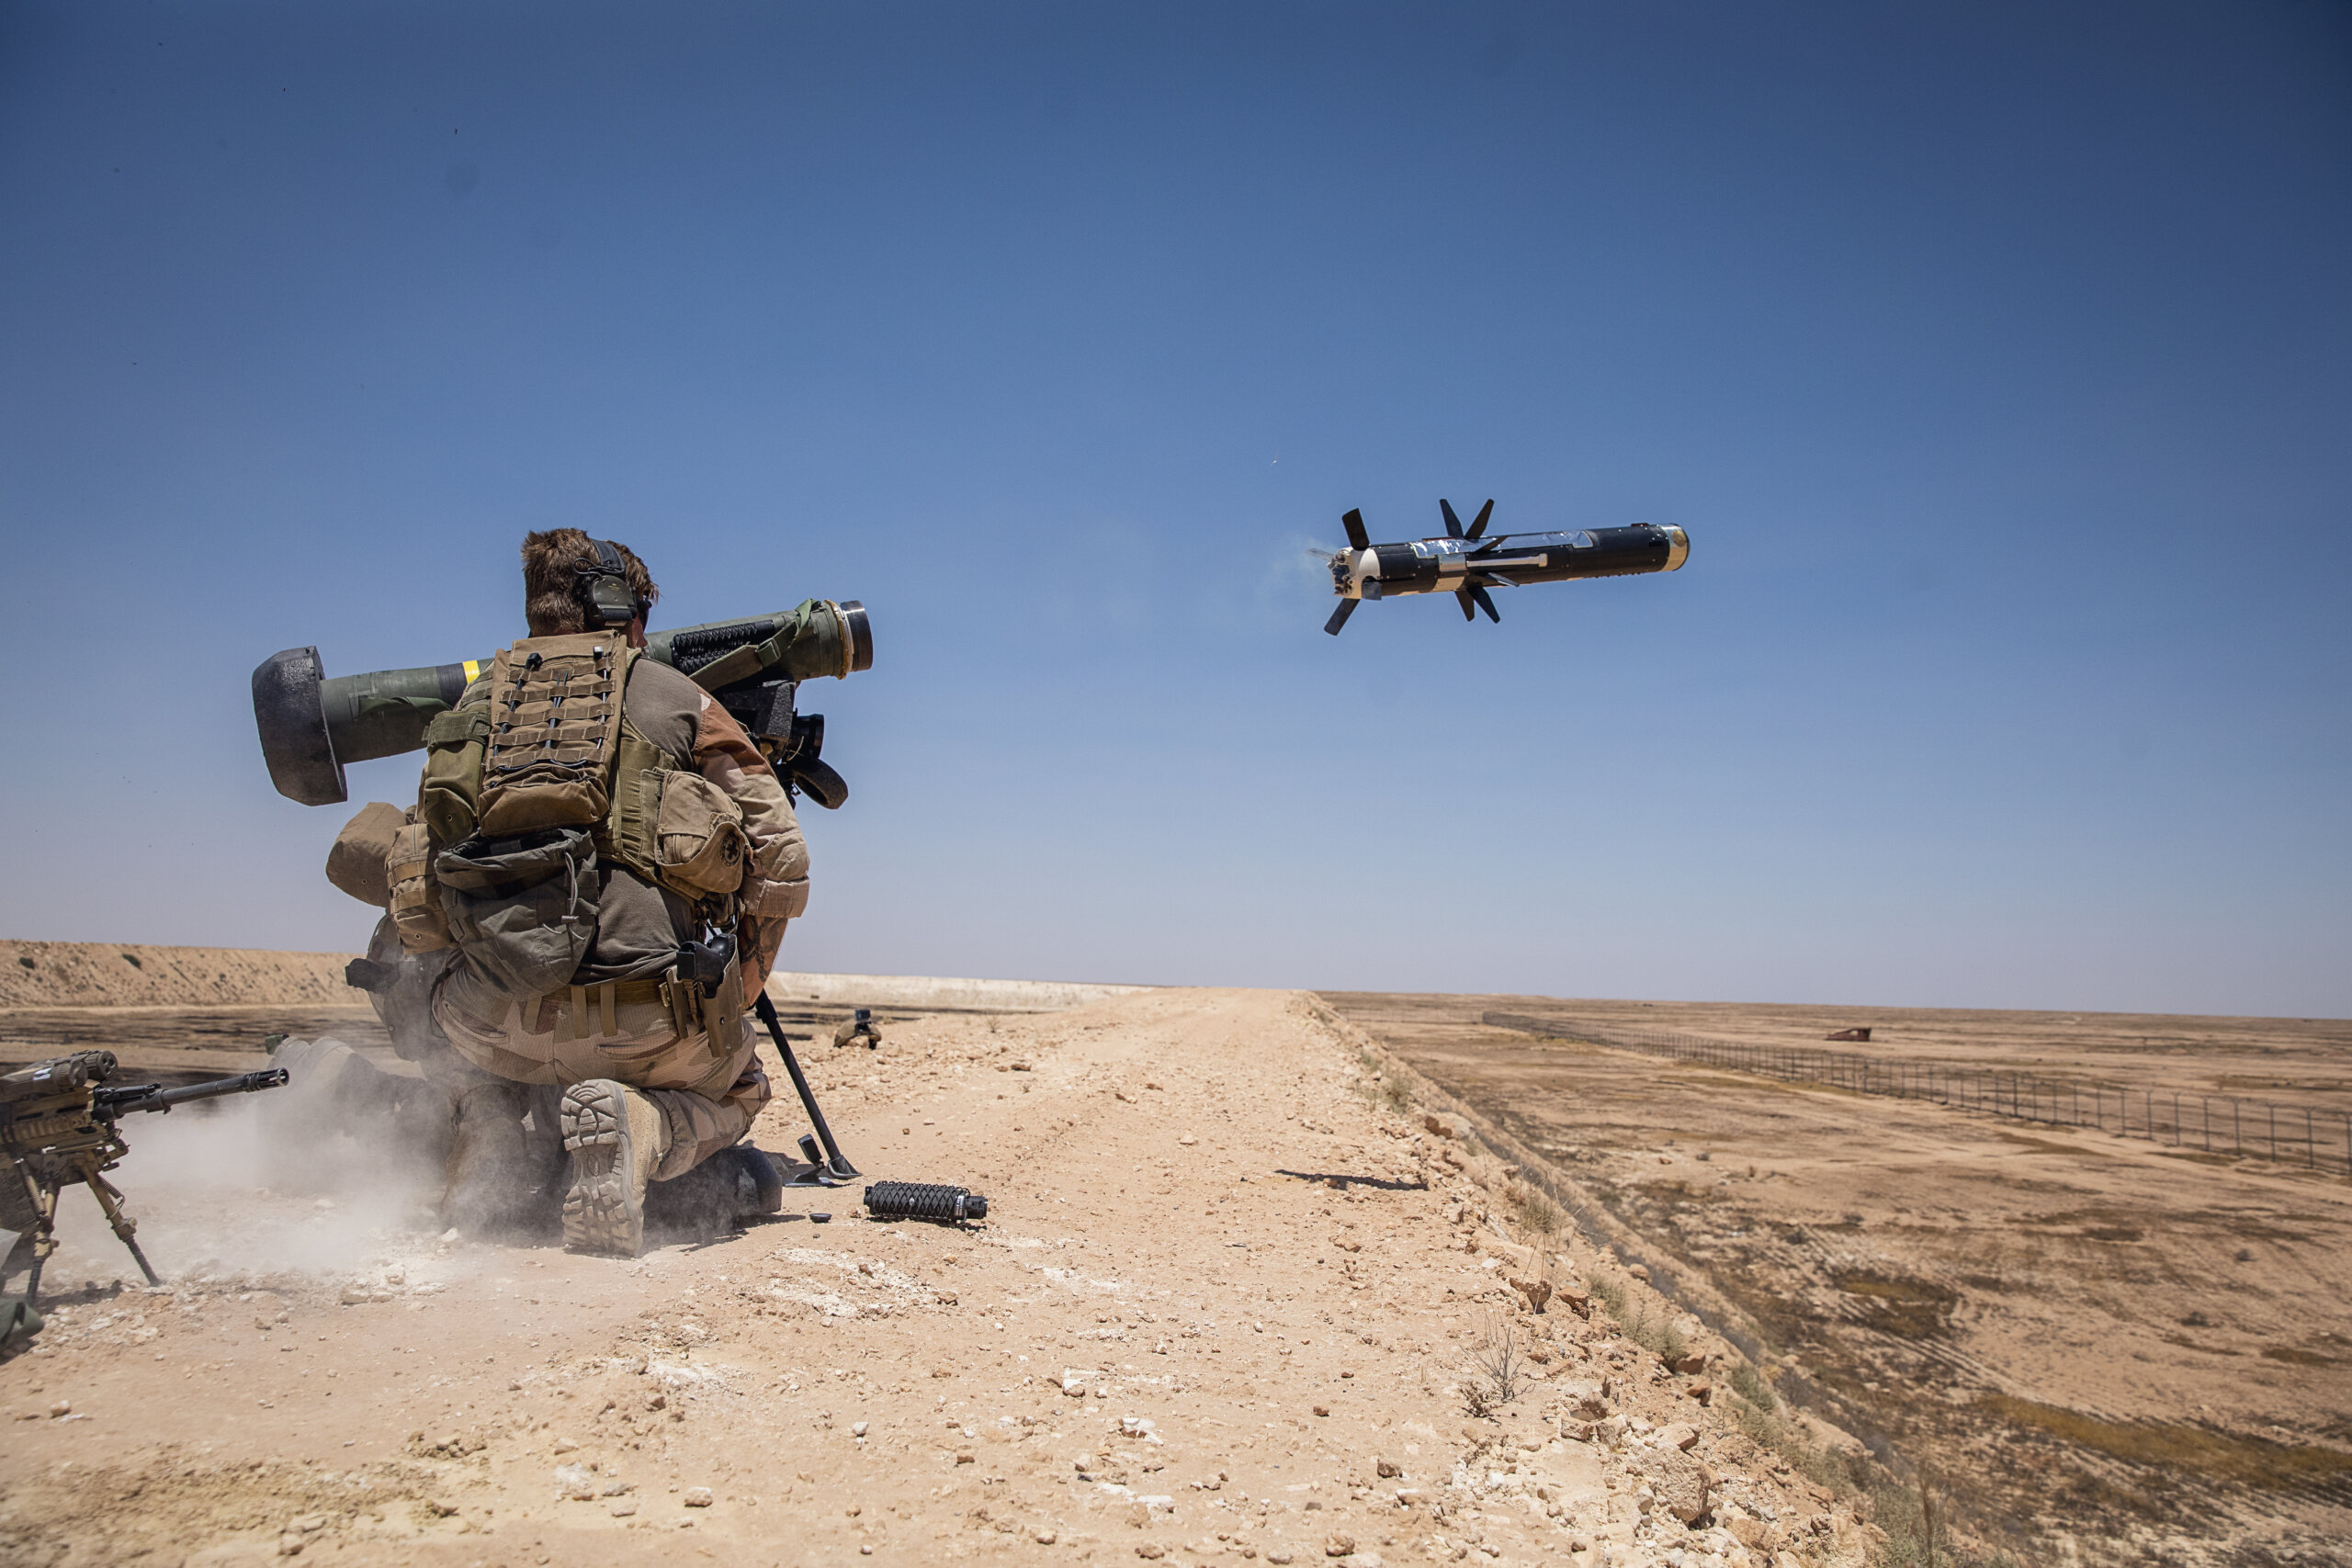 The effectiveness of the ‘fire-and-forget’ Javelin anti-tank guided missile supplied by the United States has been successfully highlighted by the Ukrainian military. Realistically, the “several hundred” launchers reportedly supplied would have been stretched to meet the needs of multiple combat zones. Ideally these would be employed against high priority targets. (DVIDS/US Army)